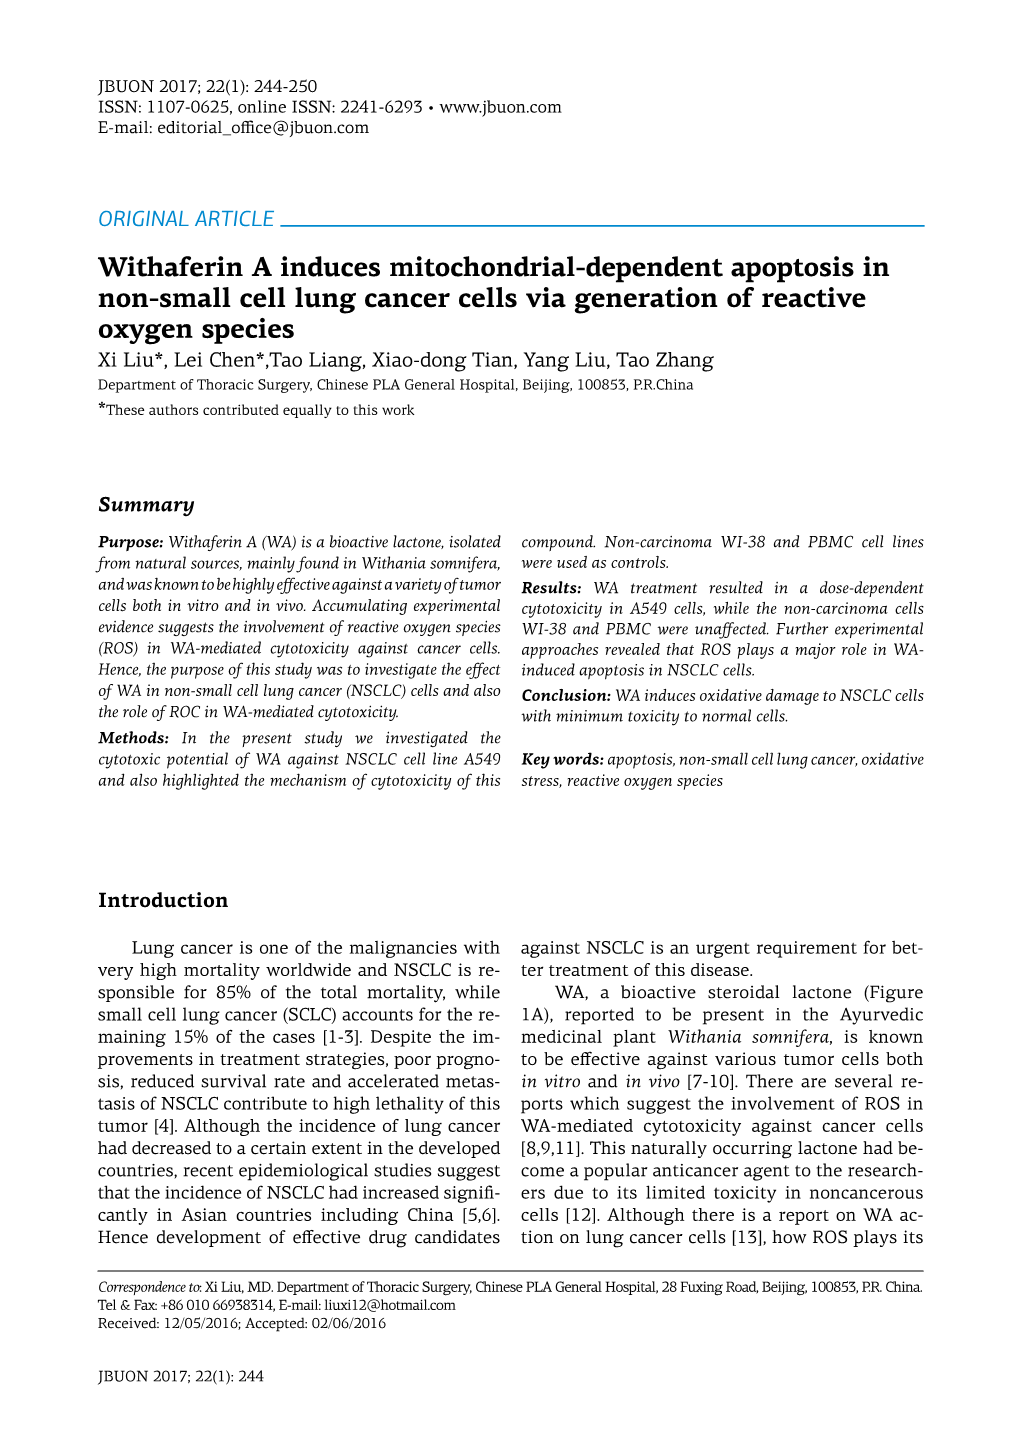 Withaferin a Induces Mitochondrial-Dependent Apoptosis